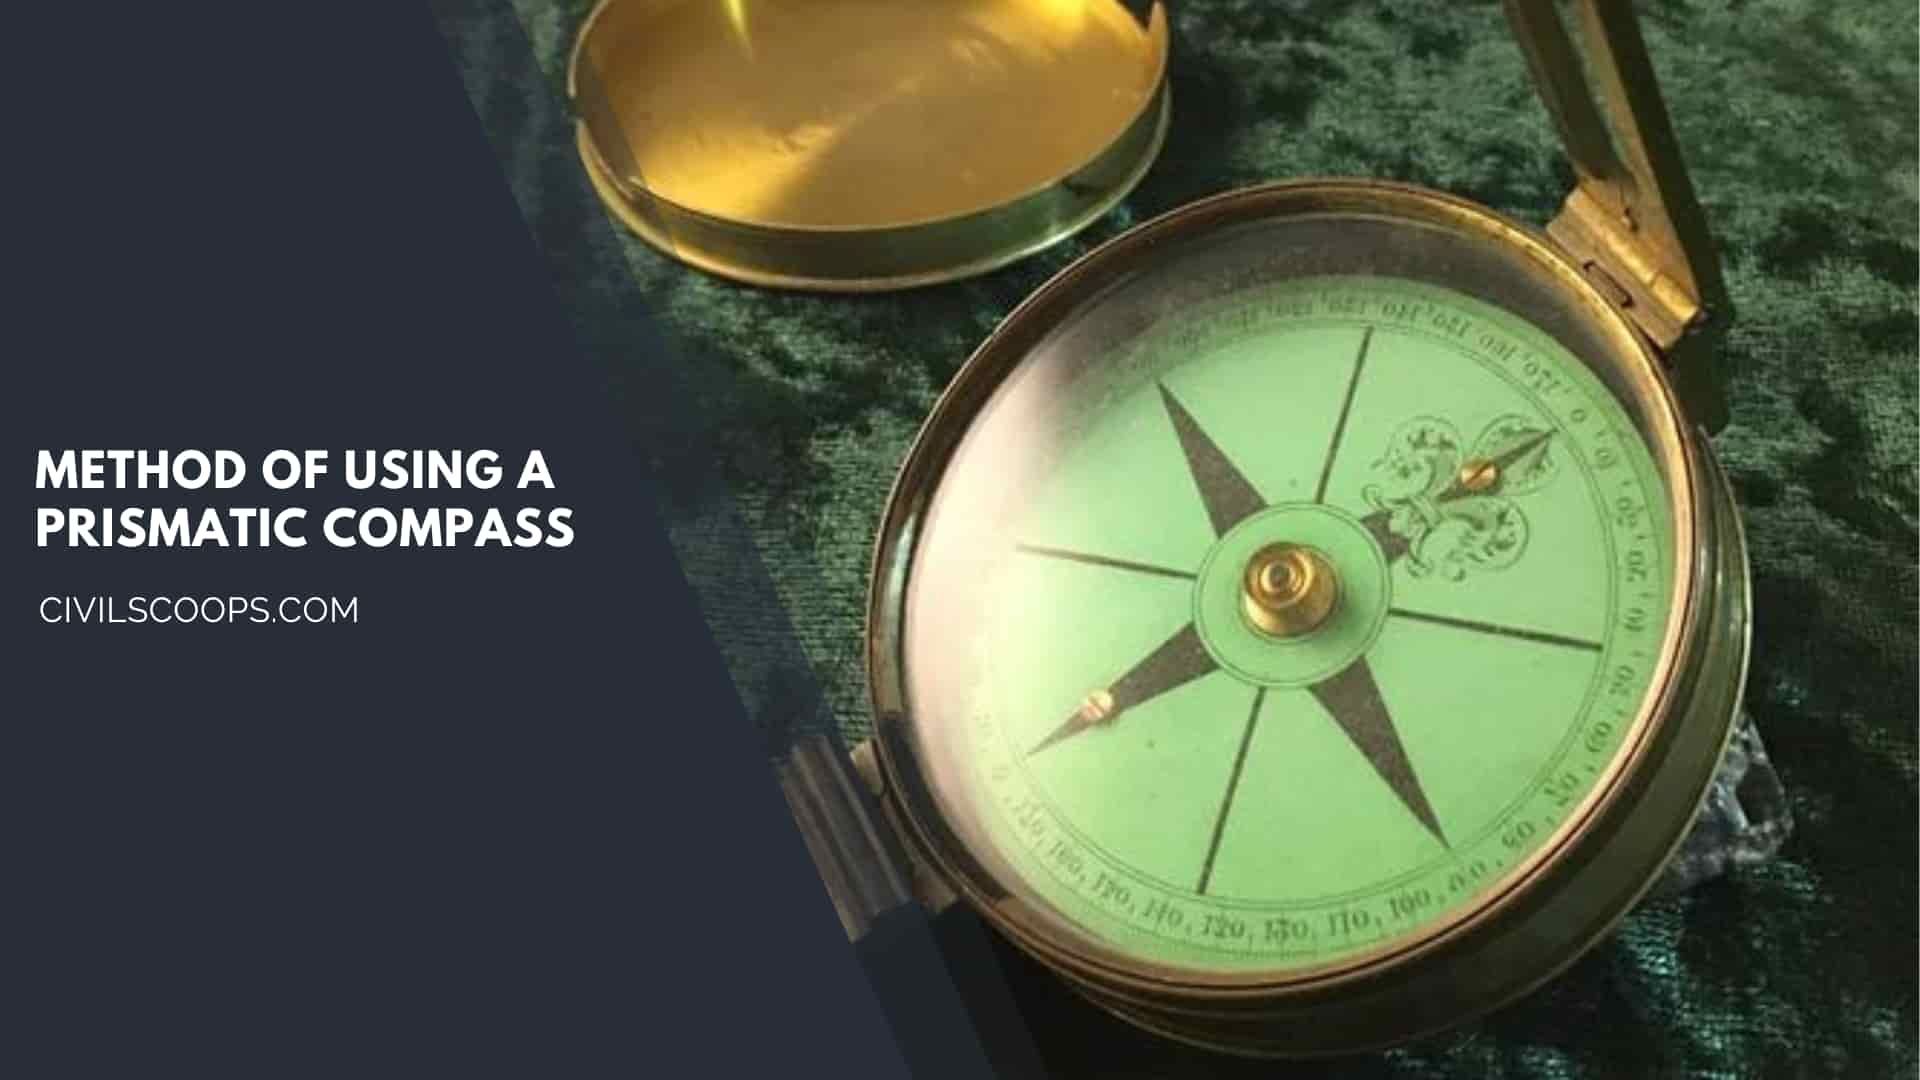 Method of Using a Prismatic Compass